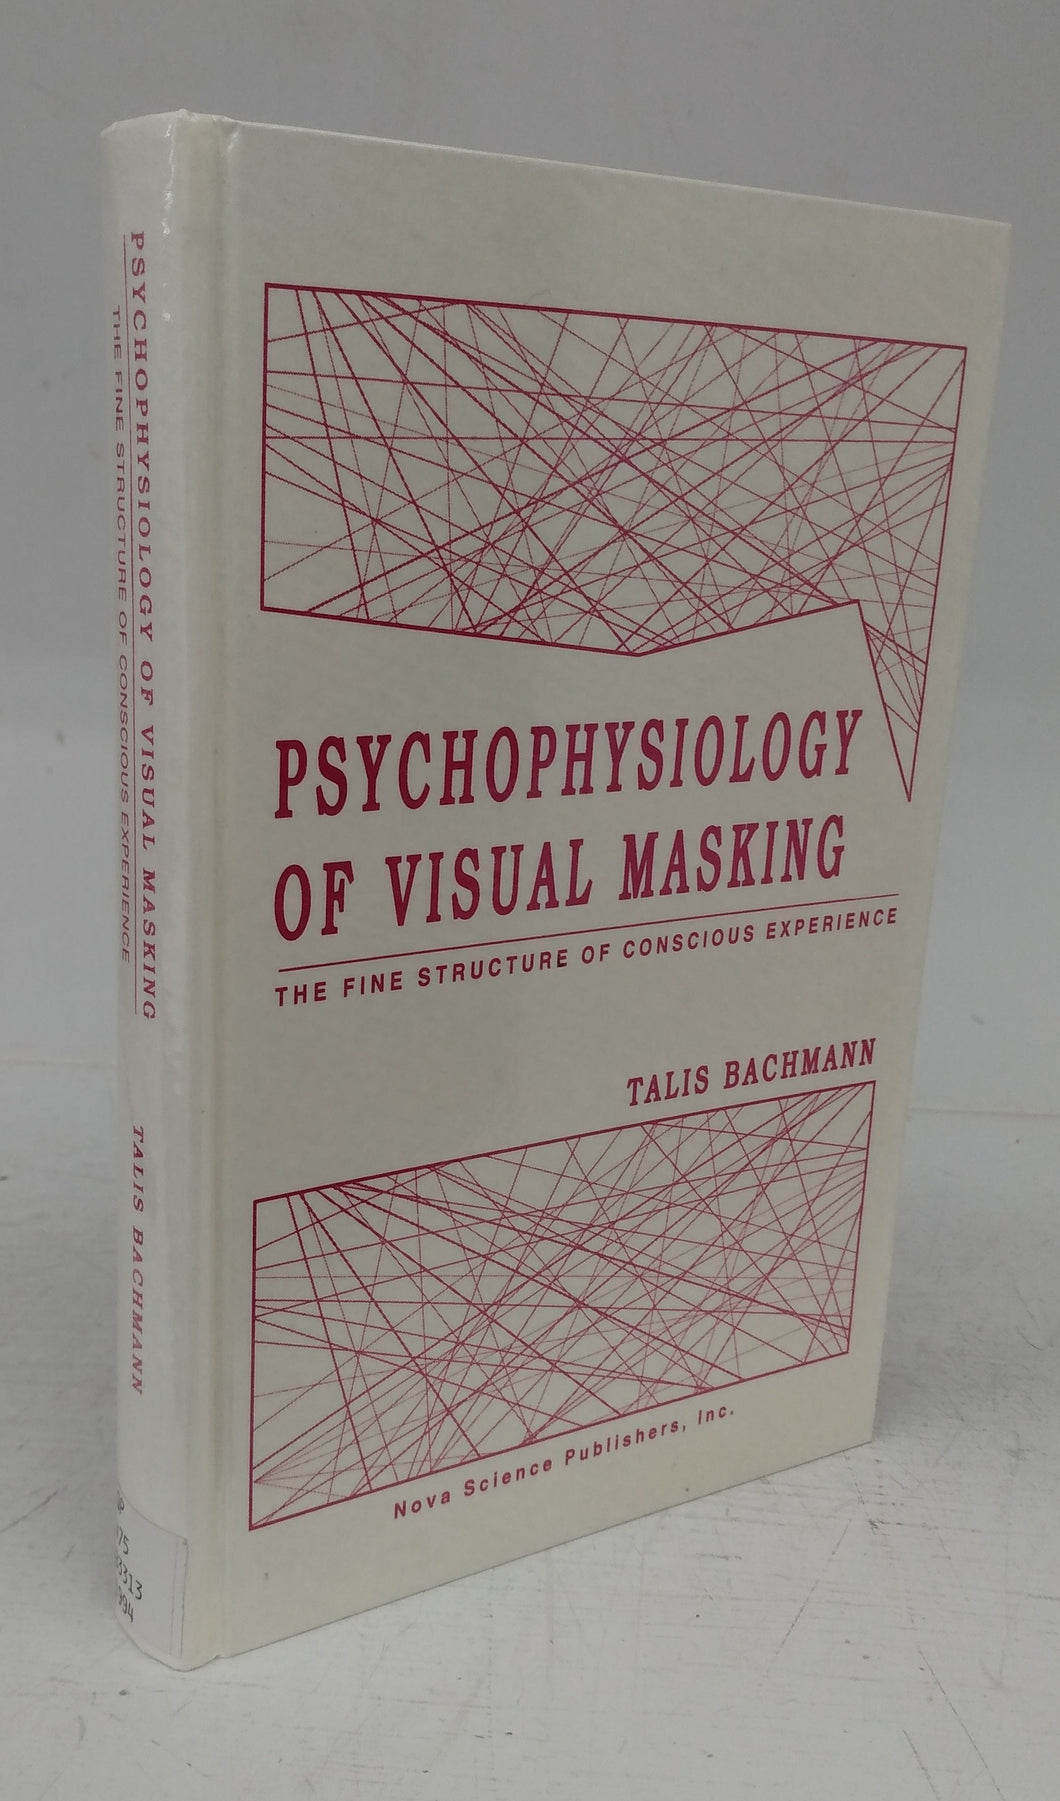 Psychophysiology of Visual Masking: The Fine Structure of Conscious Experience